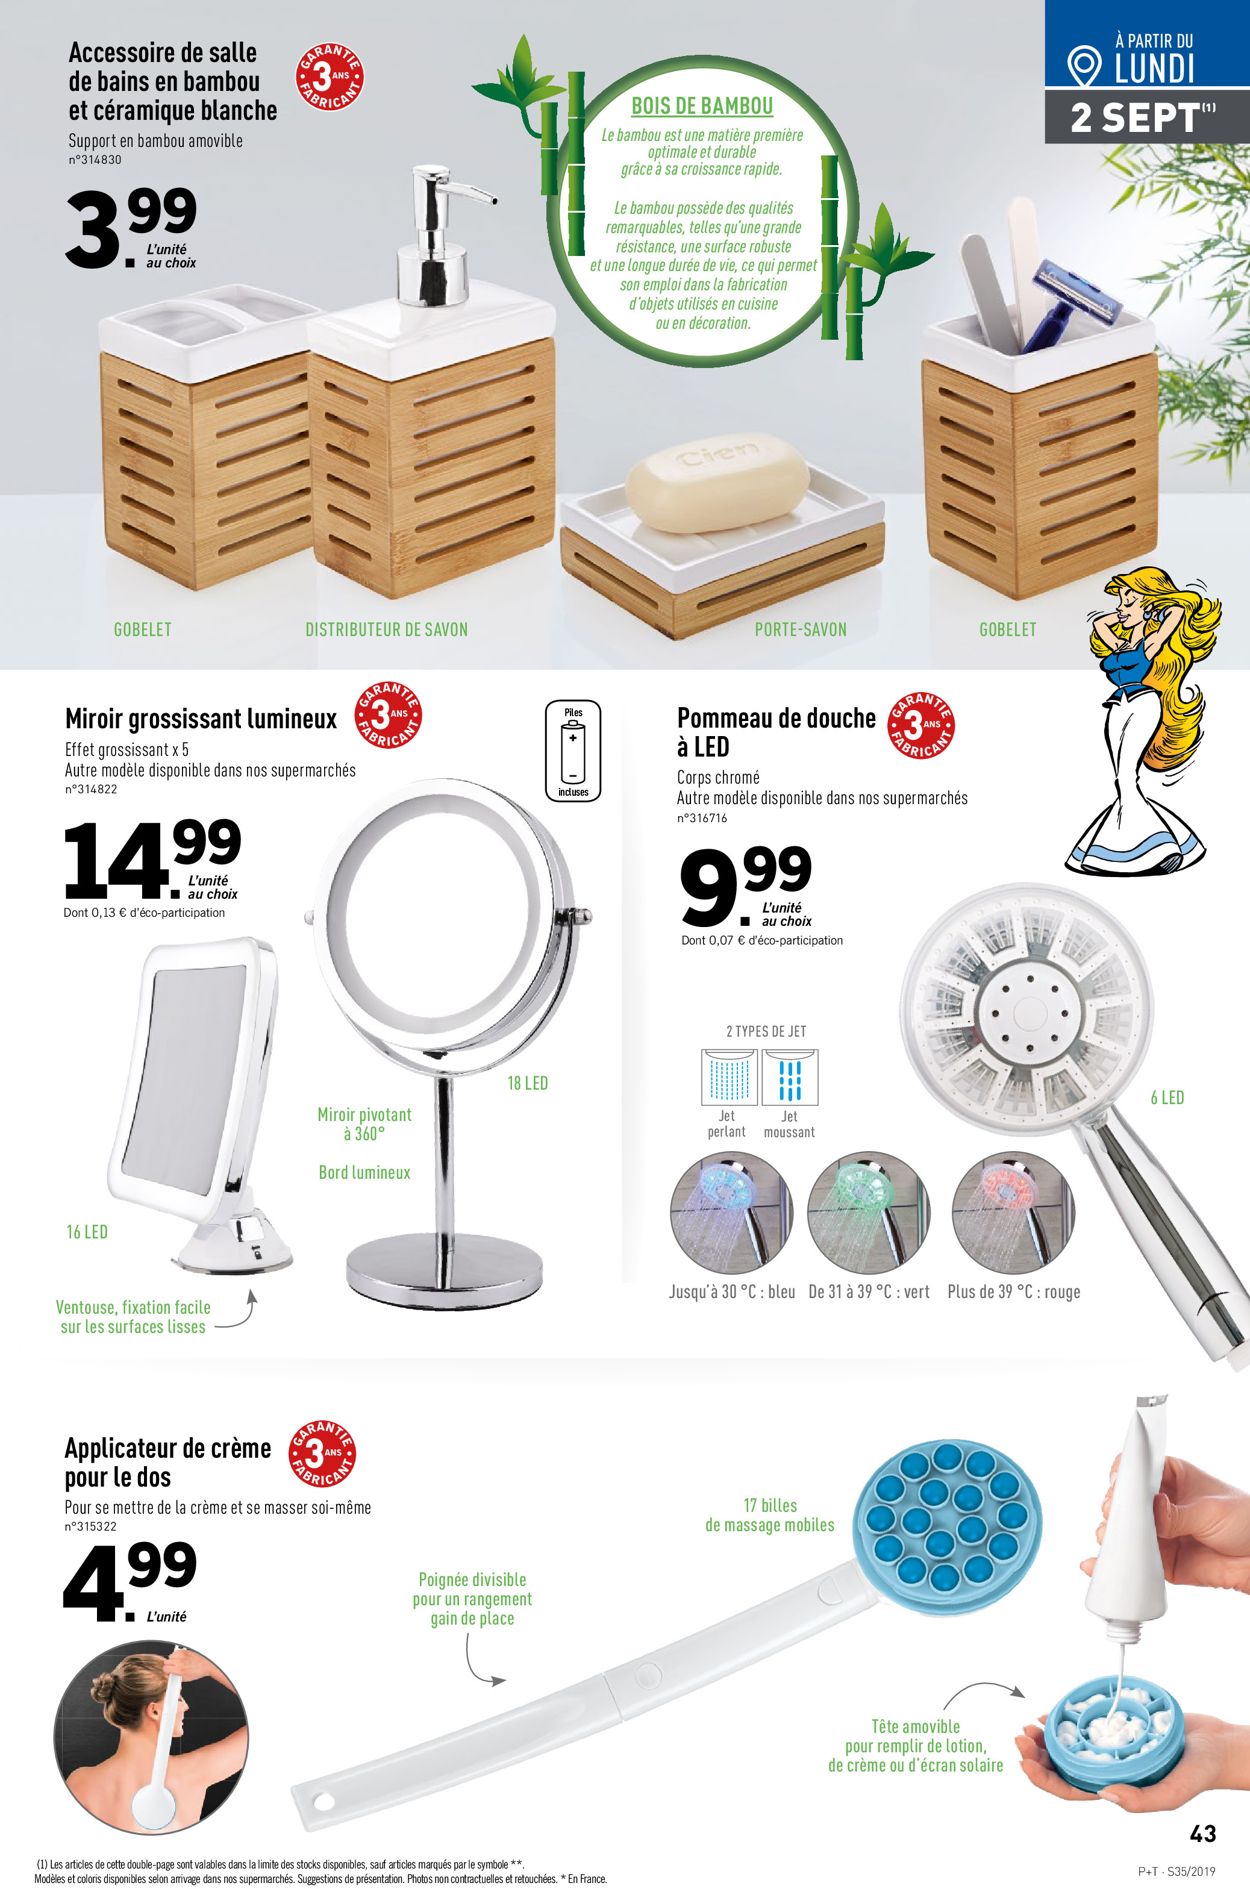 Lidl Catalogue - 28.08-03.09.2019 (Page 43)